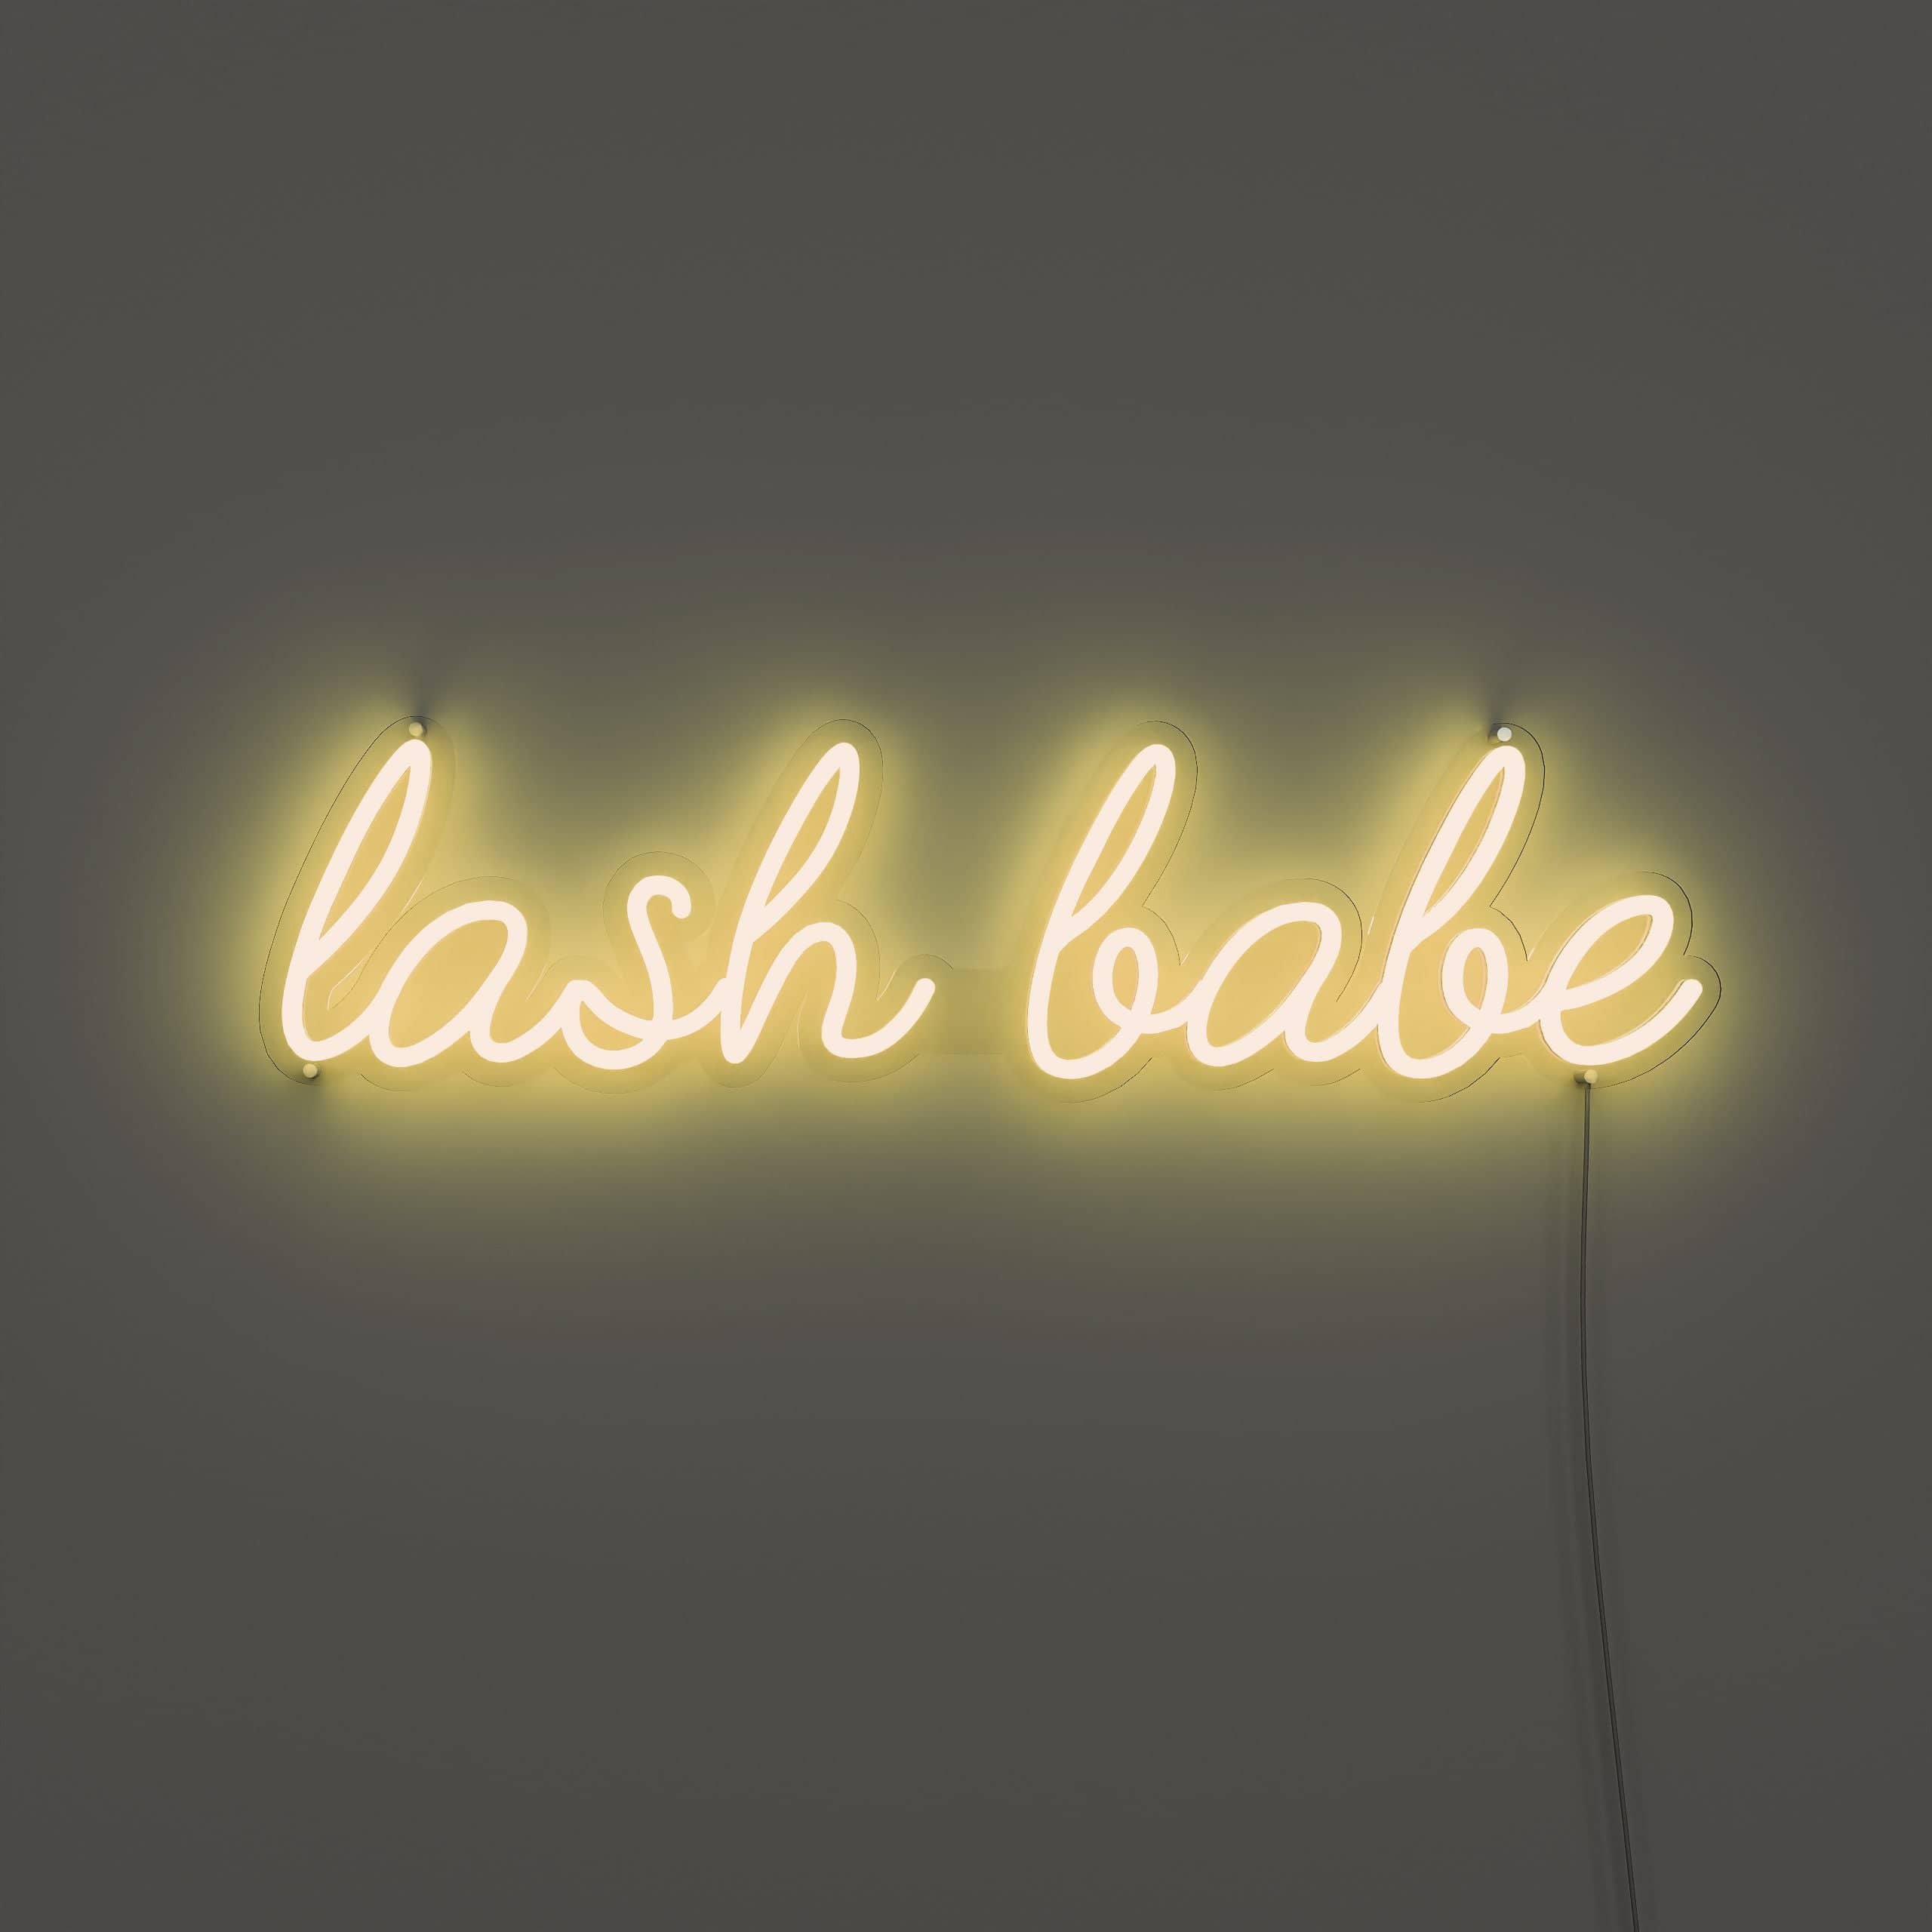 embrace-the-allure-of-lash-perfection!-neon-sign-lite